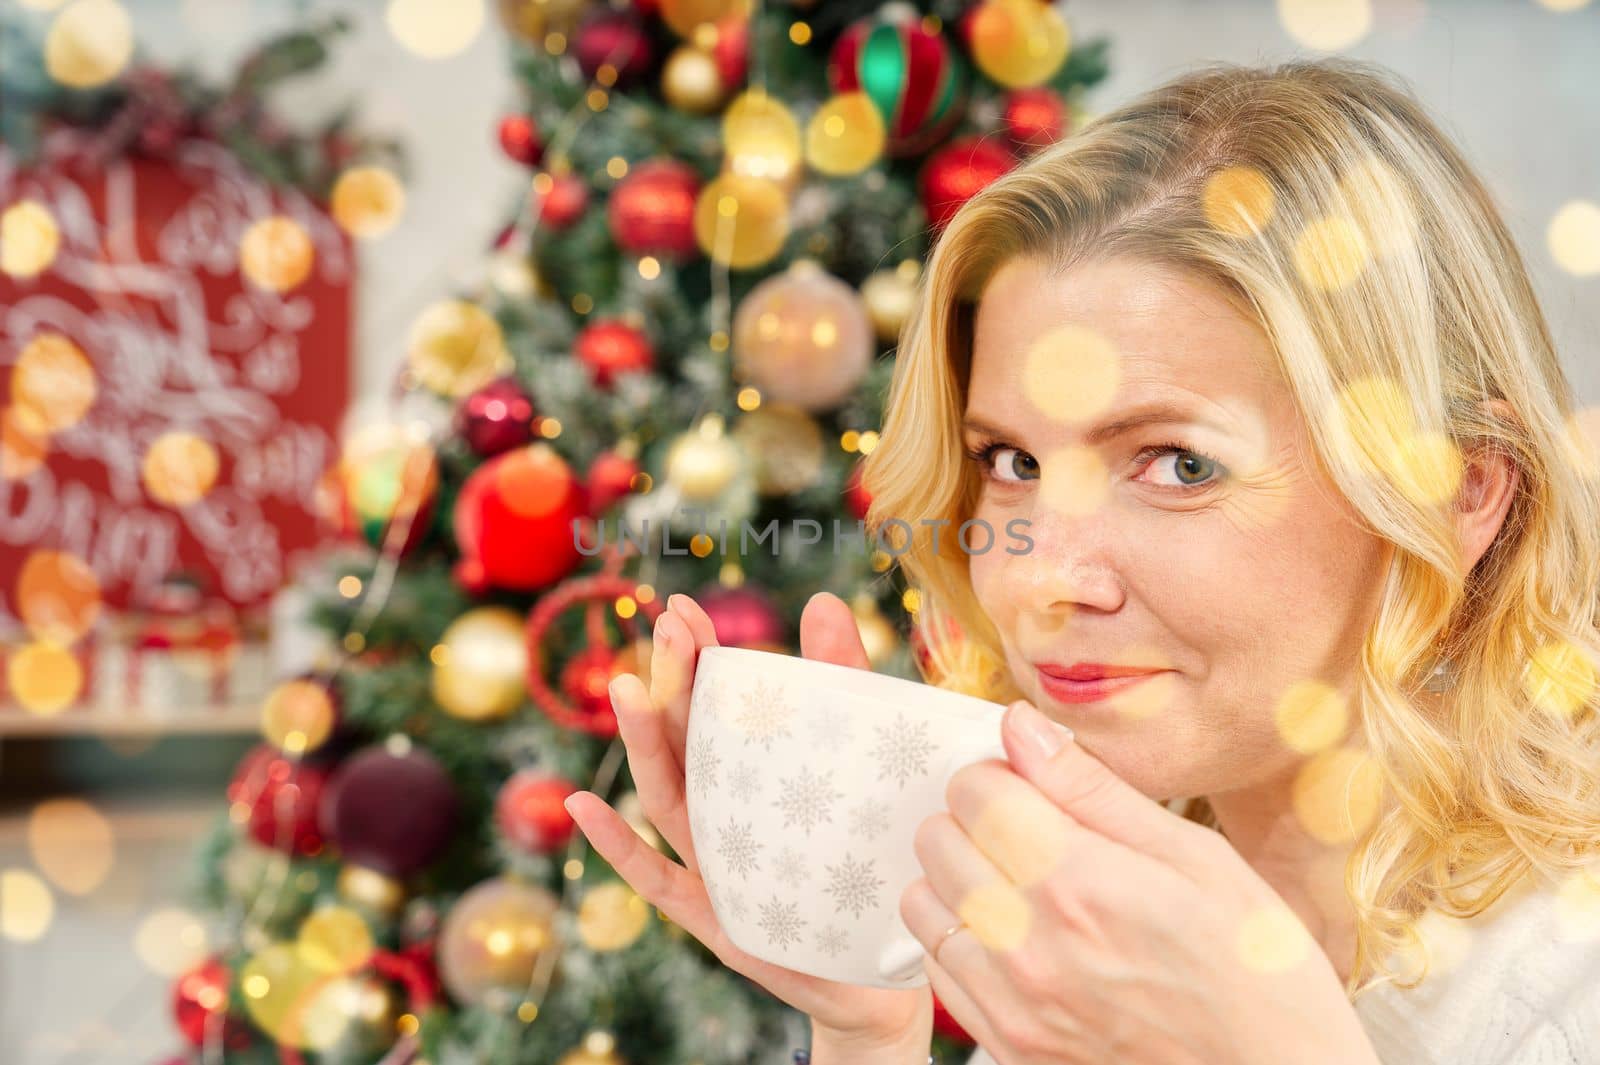 Girl in white sweater holding a cup of warm coffee or tea on background of a Christmas tree. by PhotoTime